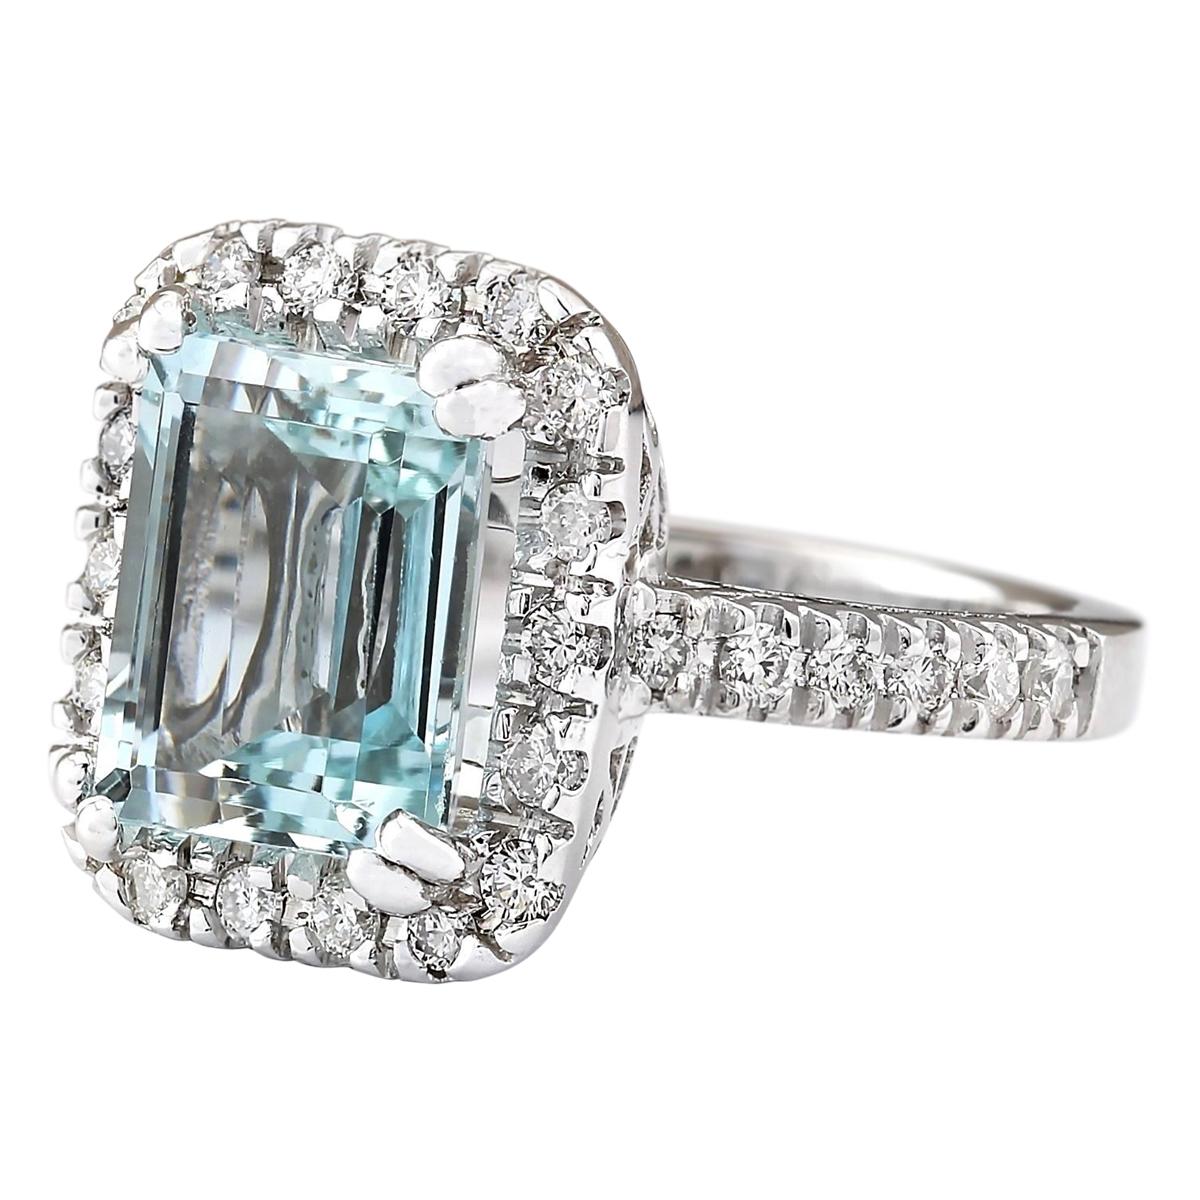 5.63 Carat Natural Aquamarine 14 Karat White Gold Diamond Ring
Stamped: 14K White Gold
Total Ring Weight: 8.9 Grams
Total Natural Aquamarine Weight is 4.83 Carat (Measures: 11.00x9.00 mm)
Color: Blue
Total Natural Diamond Weight is 0.80 Carat
Color: